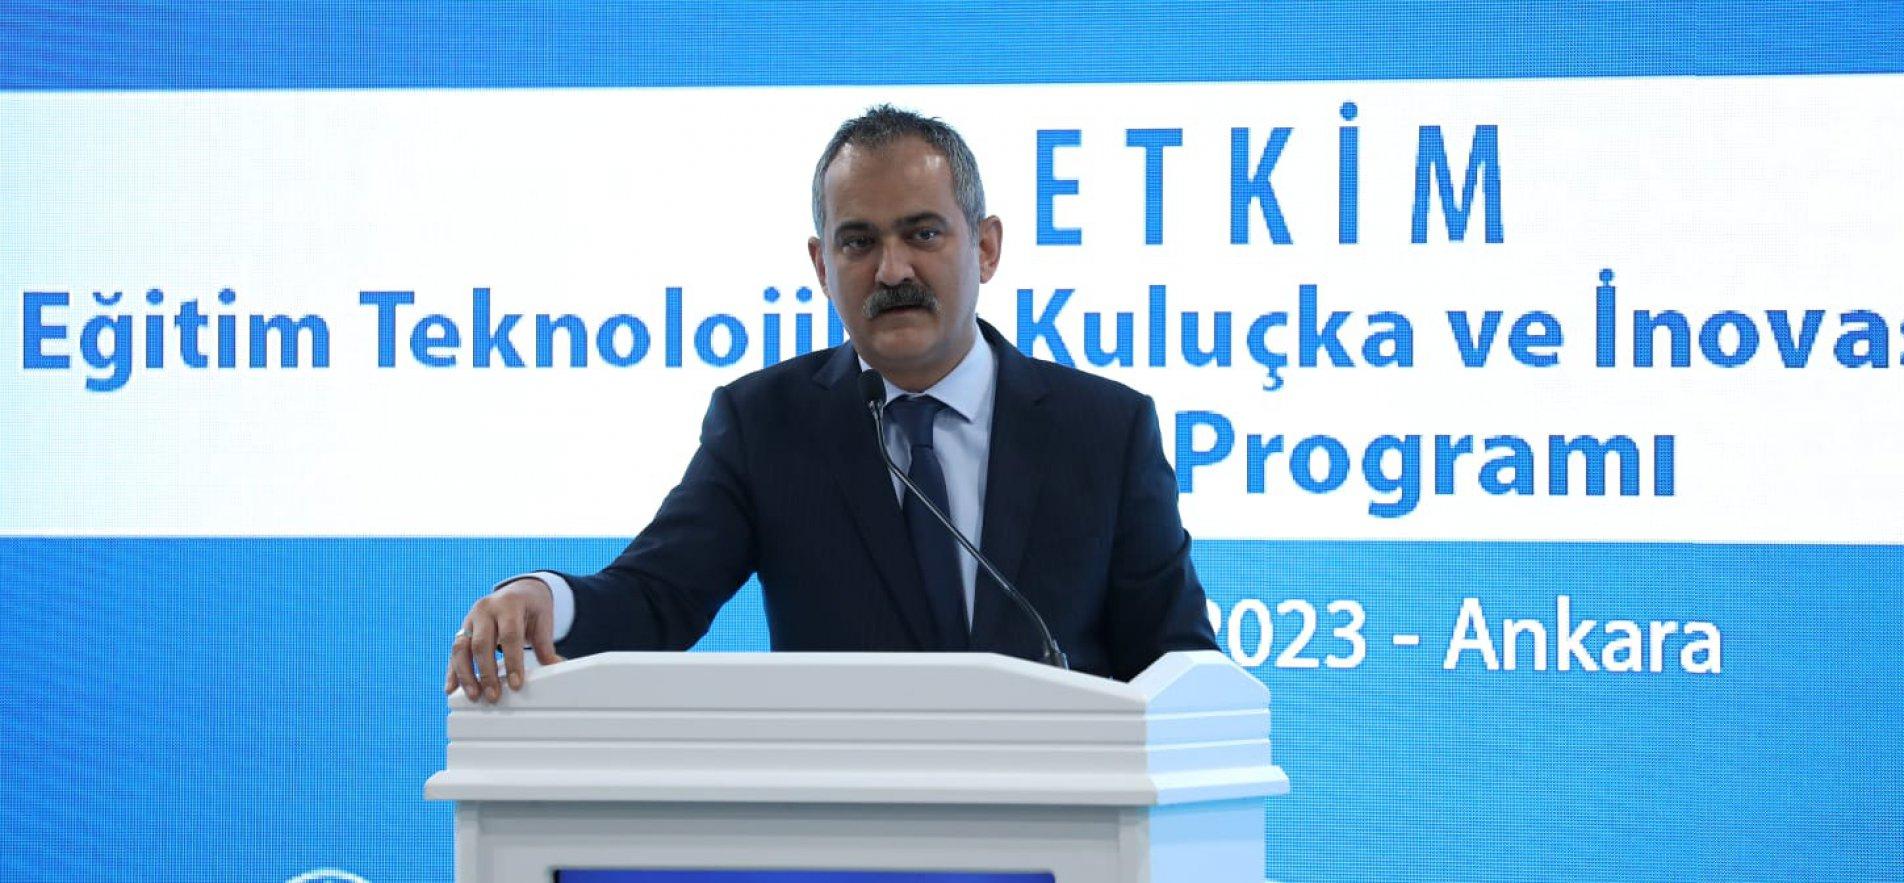 MINISTER OZER LAUNCHES THE MEB'S EDUCATION TECHNOLOGIES AND INNOVATION CENTER